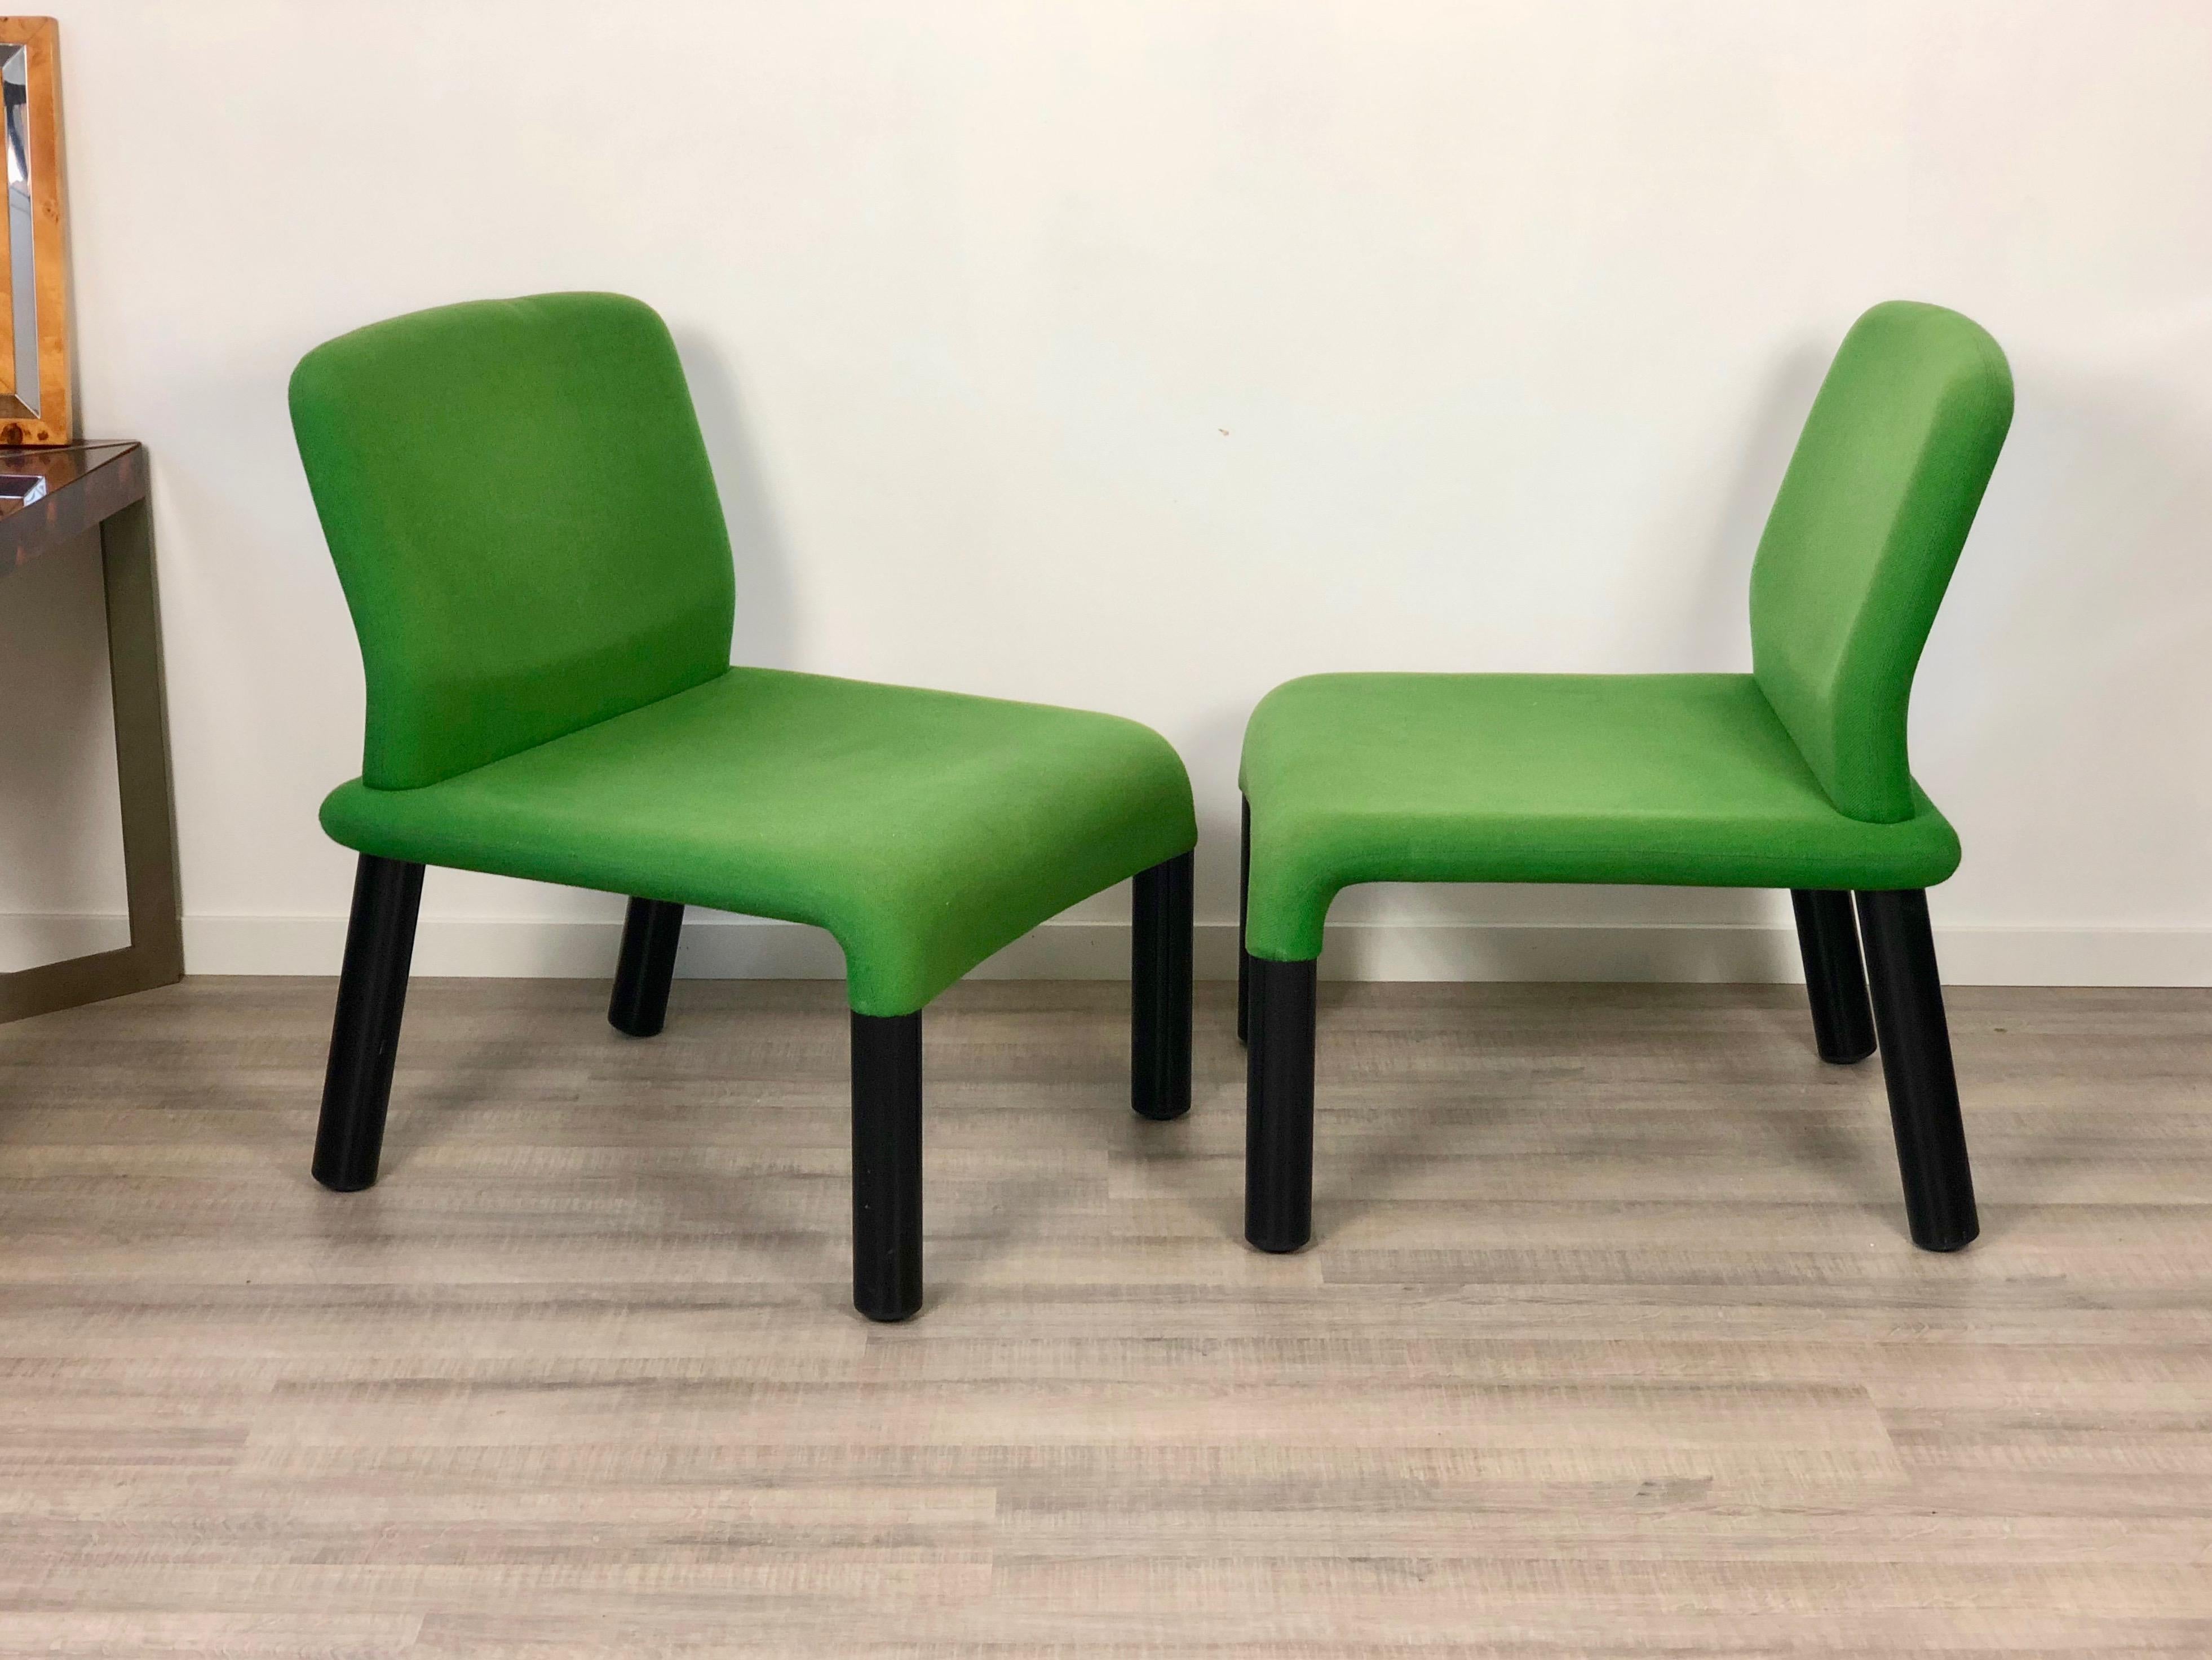 Mid-Century Modern Pair of Green Armchair in Plastic Fabric, Italy, 1970s For Sale